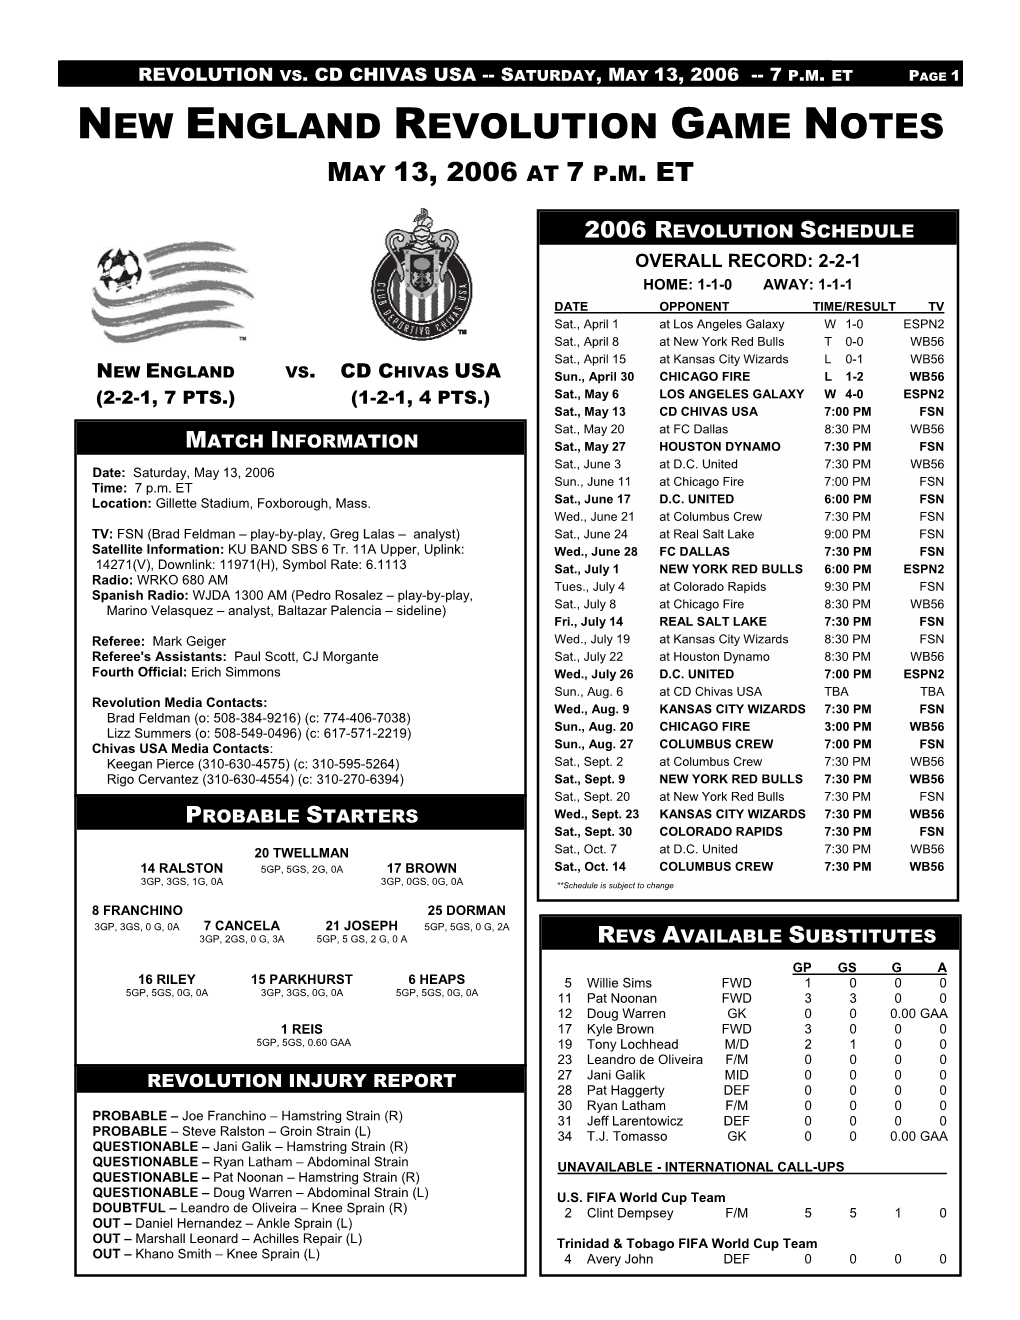 New England Revolution Game Notes May 13, 2006 at 7 P.M